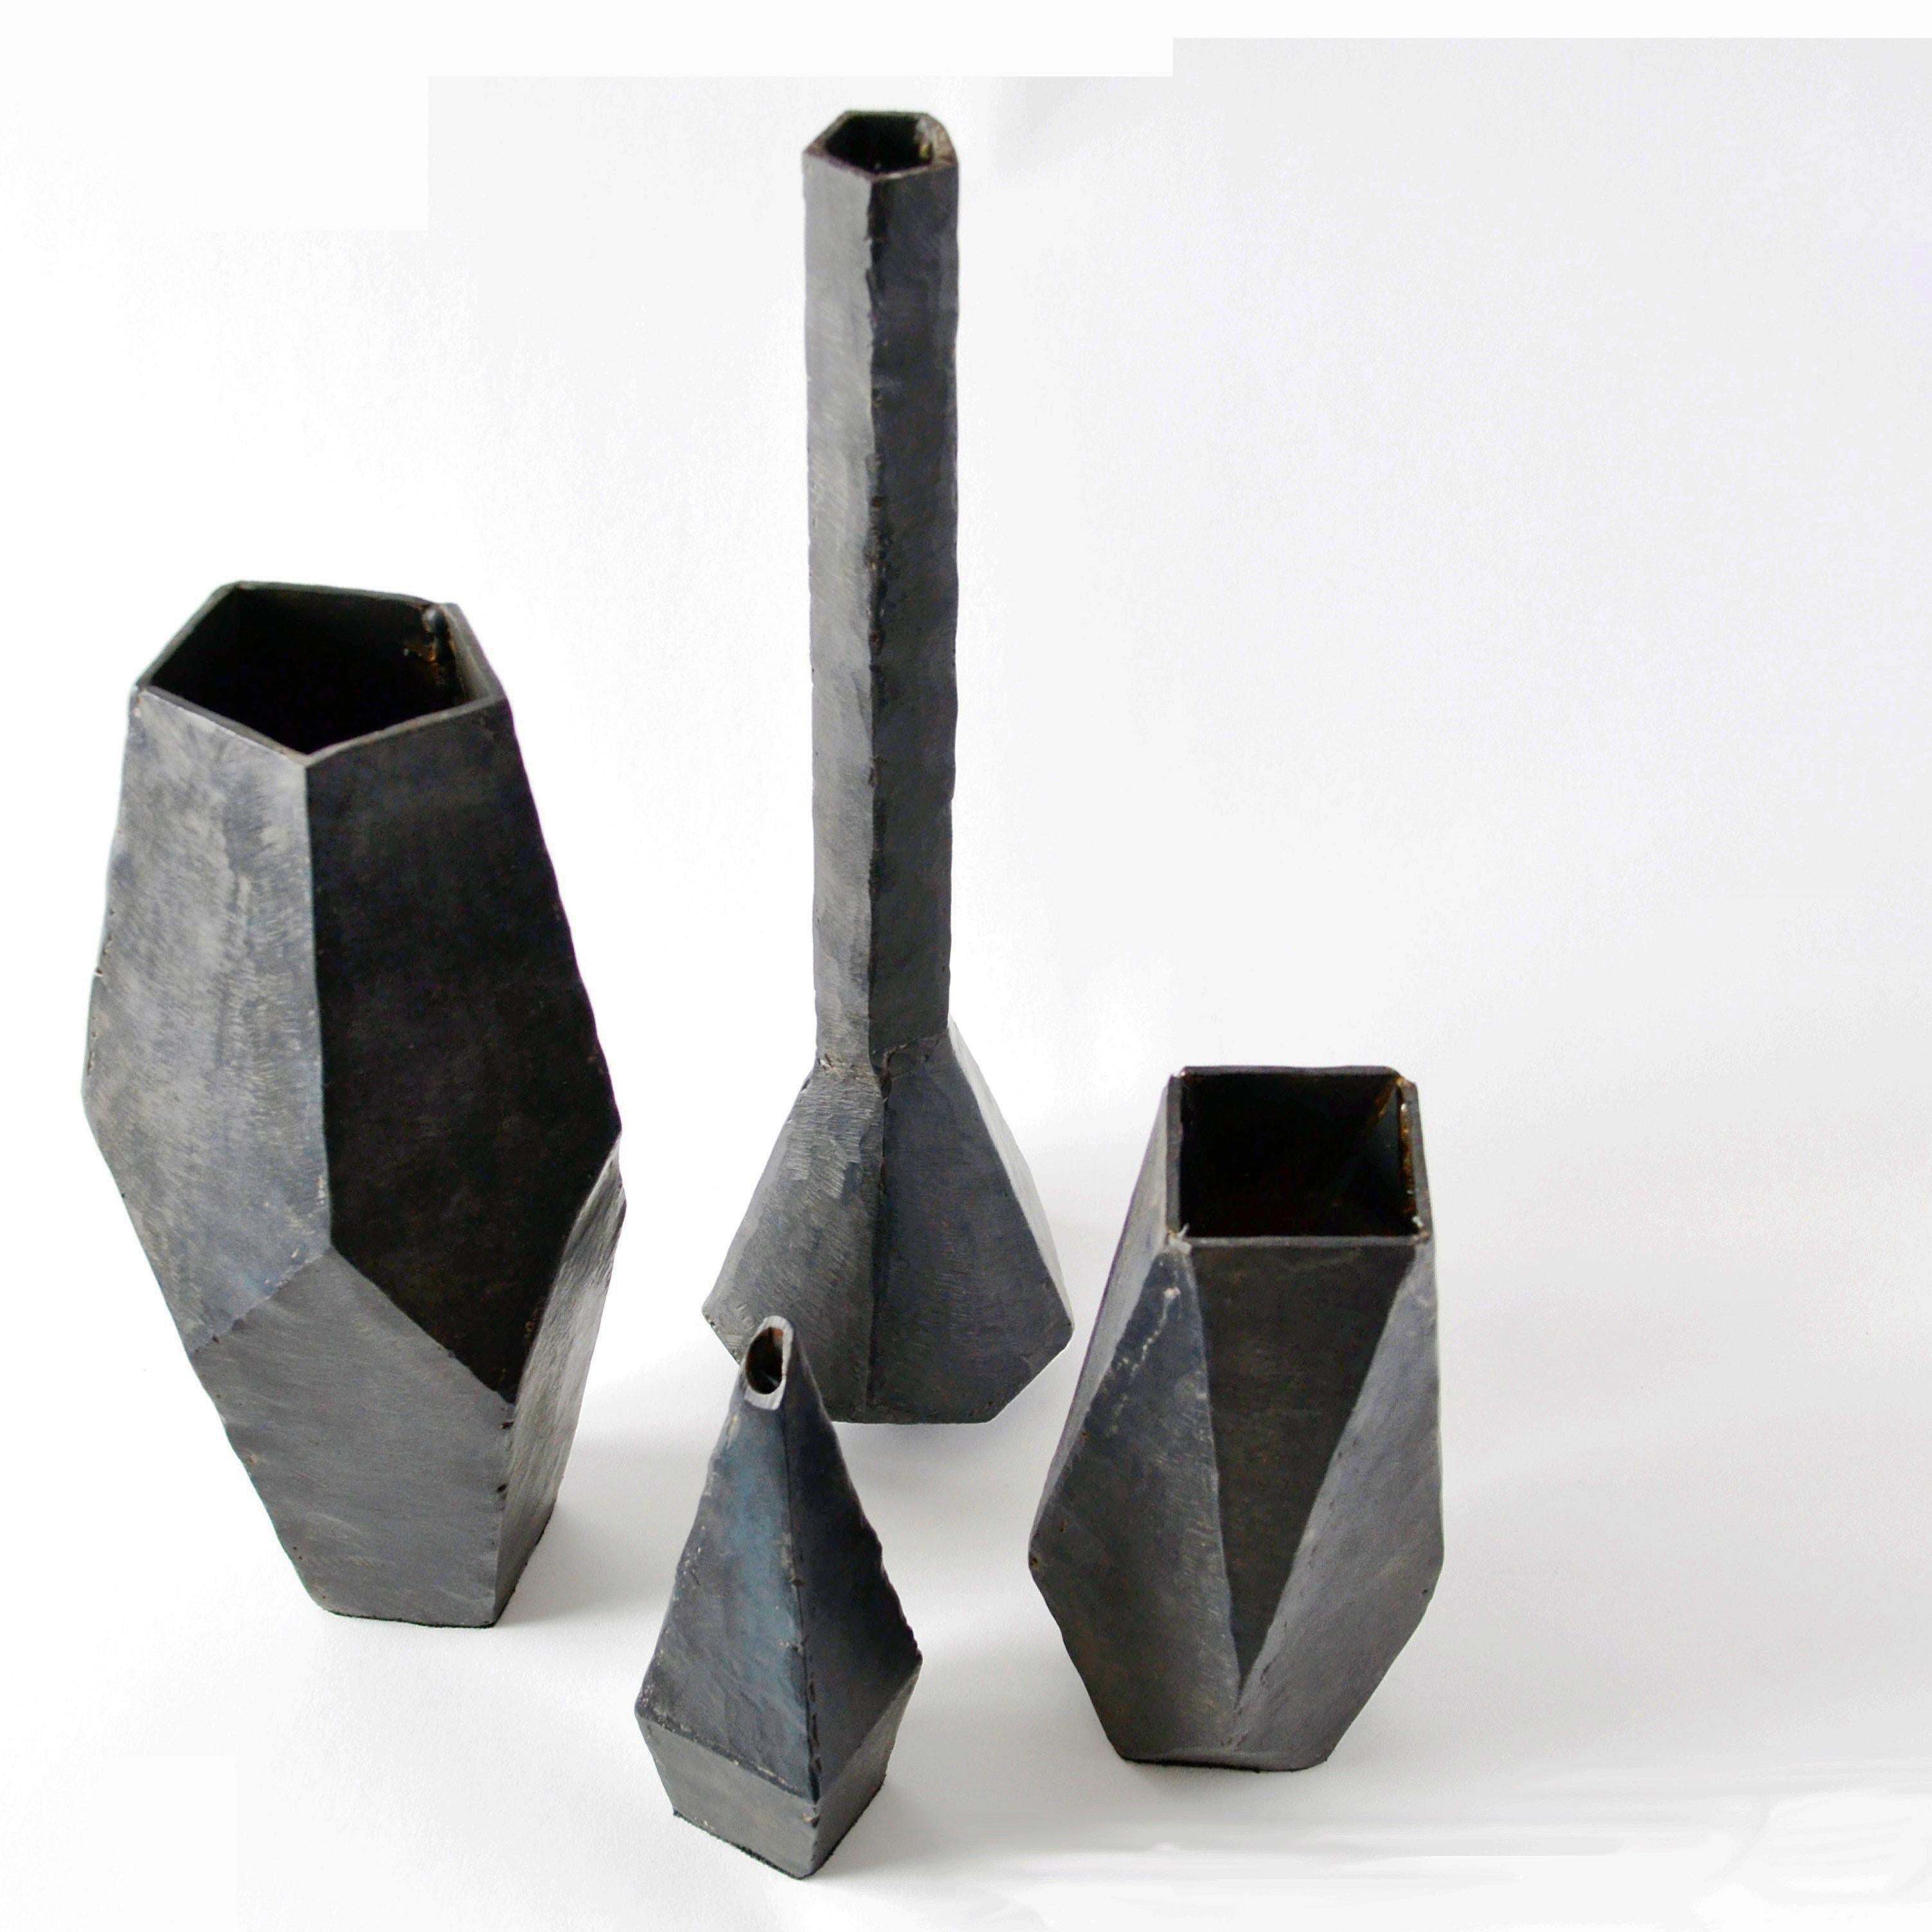 Steel Geometric Vessel Sculpture Contemporary Stark Rough Carved Blackened Waxed Iron For Sale